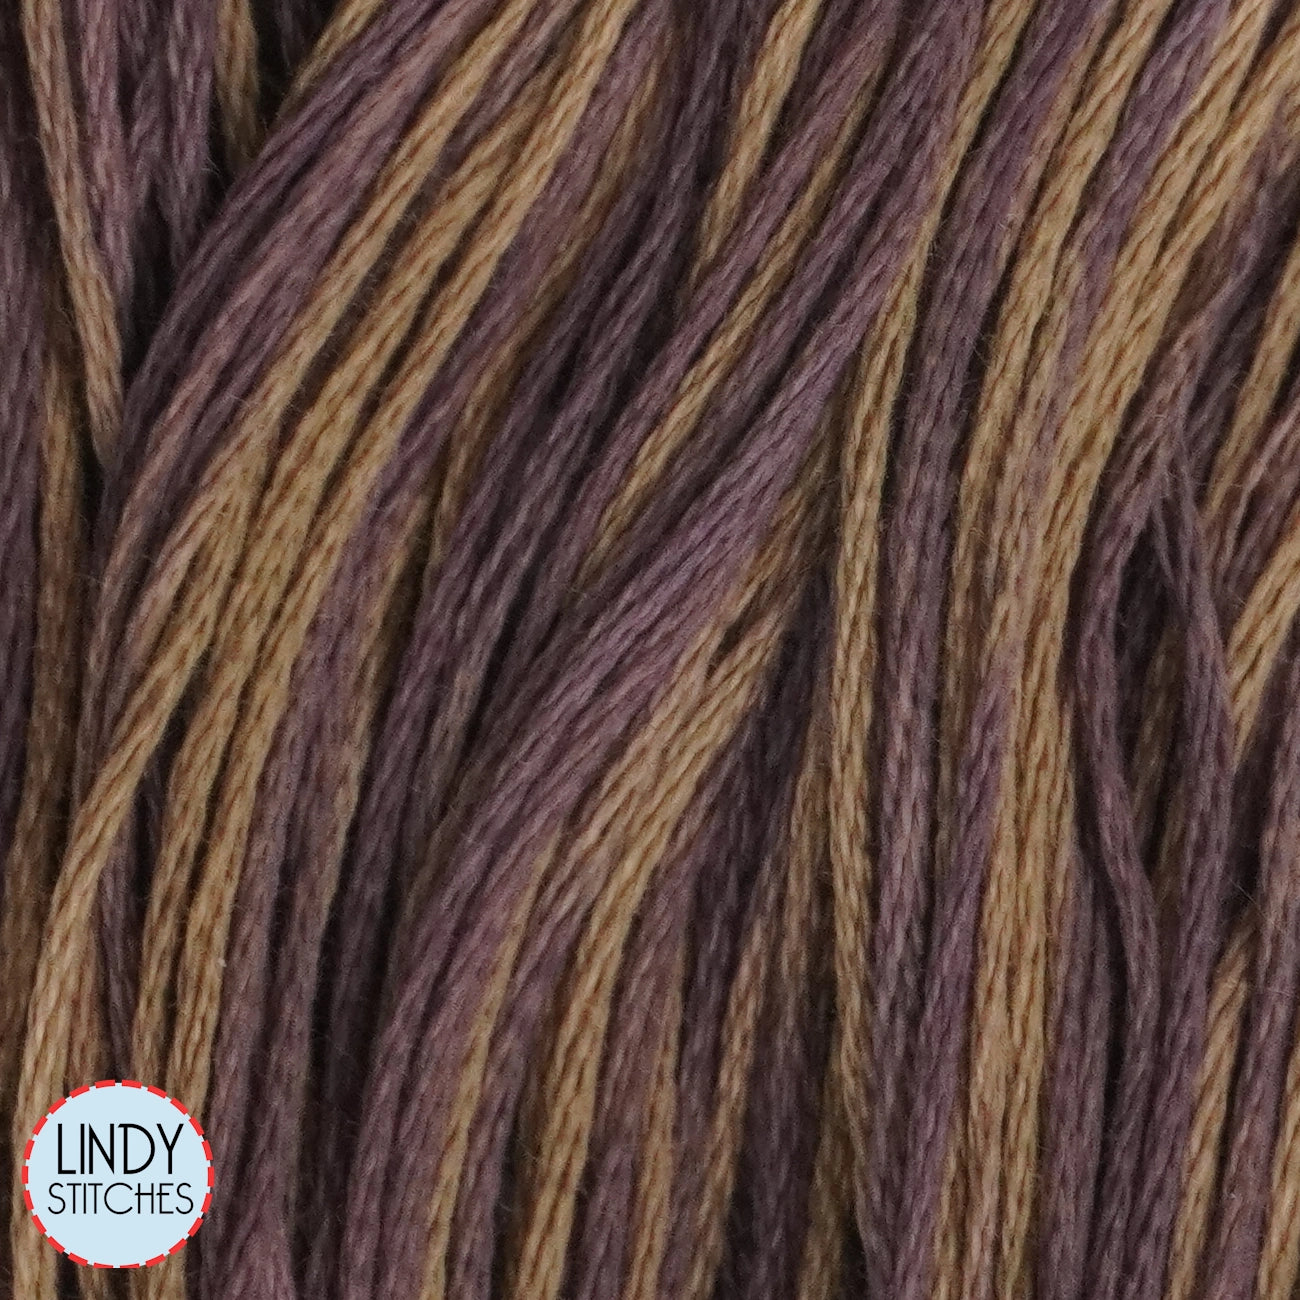 Stone Weeks Dye Works Floss Hand Dyed Cotton Skein 2326